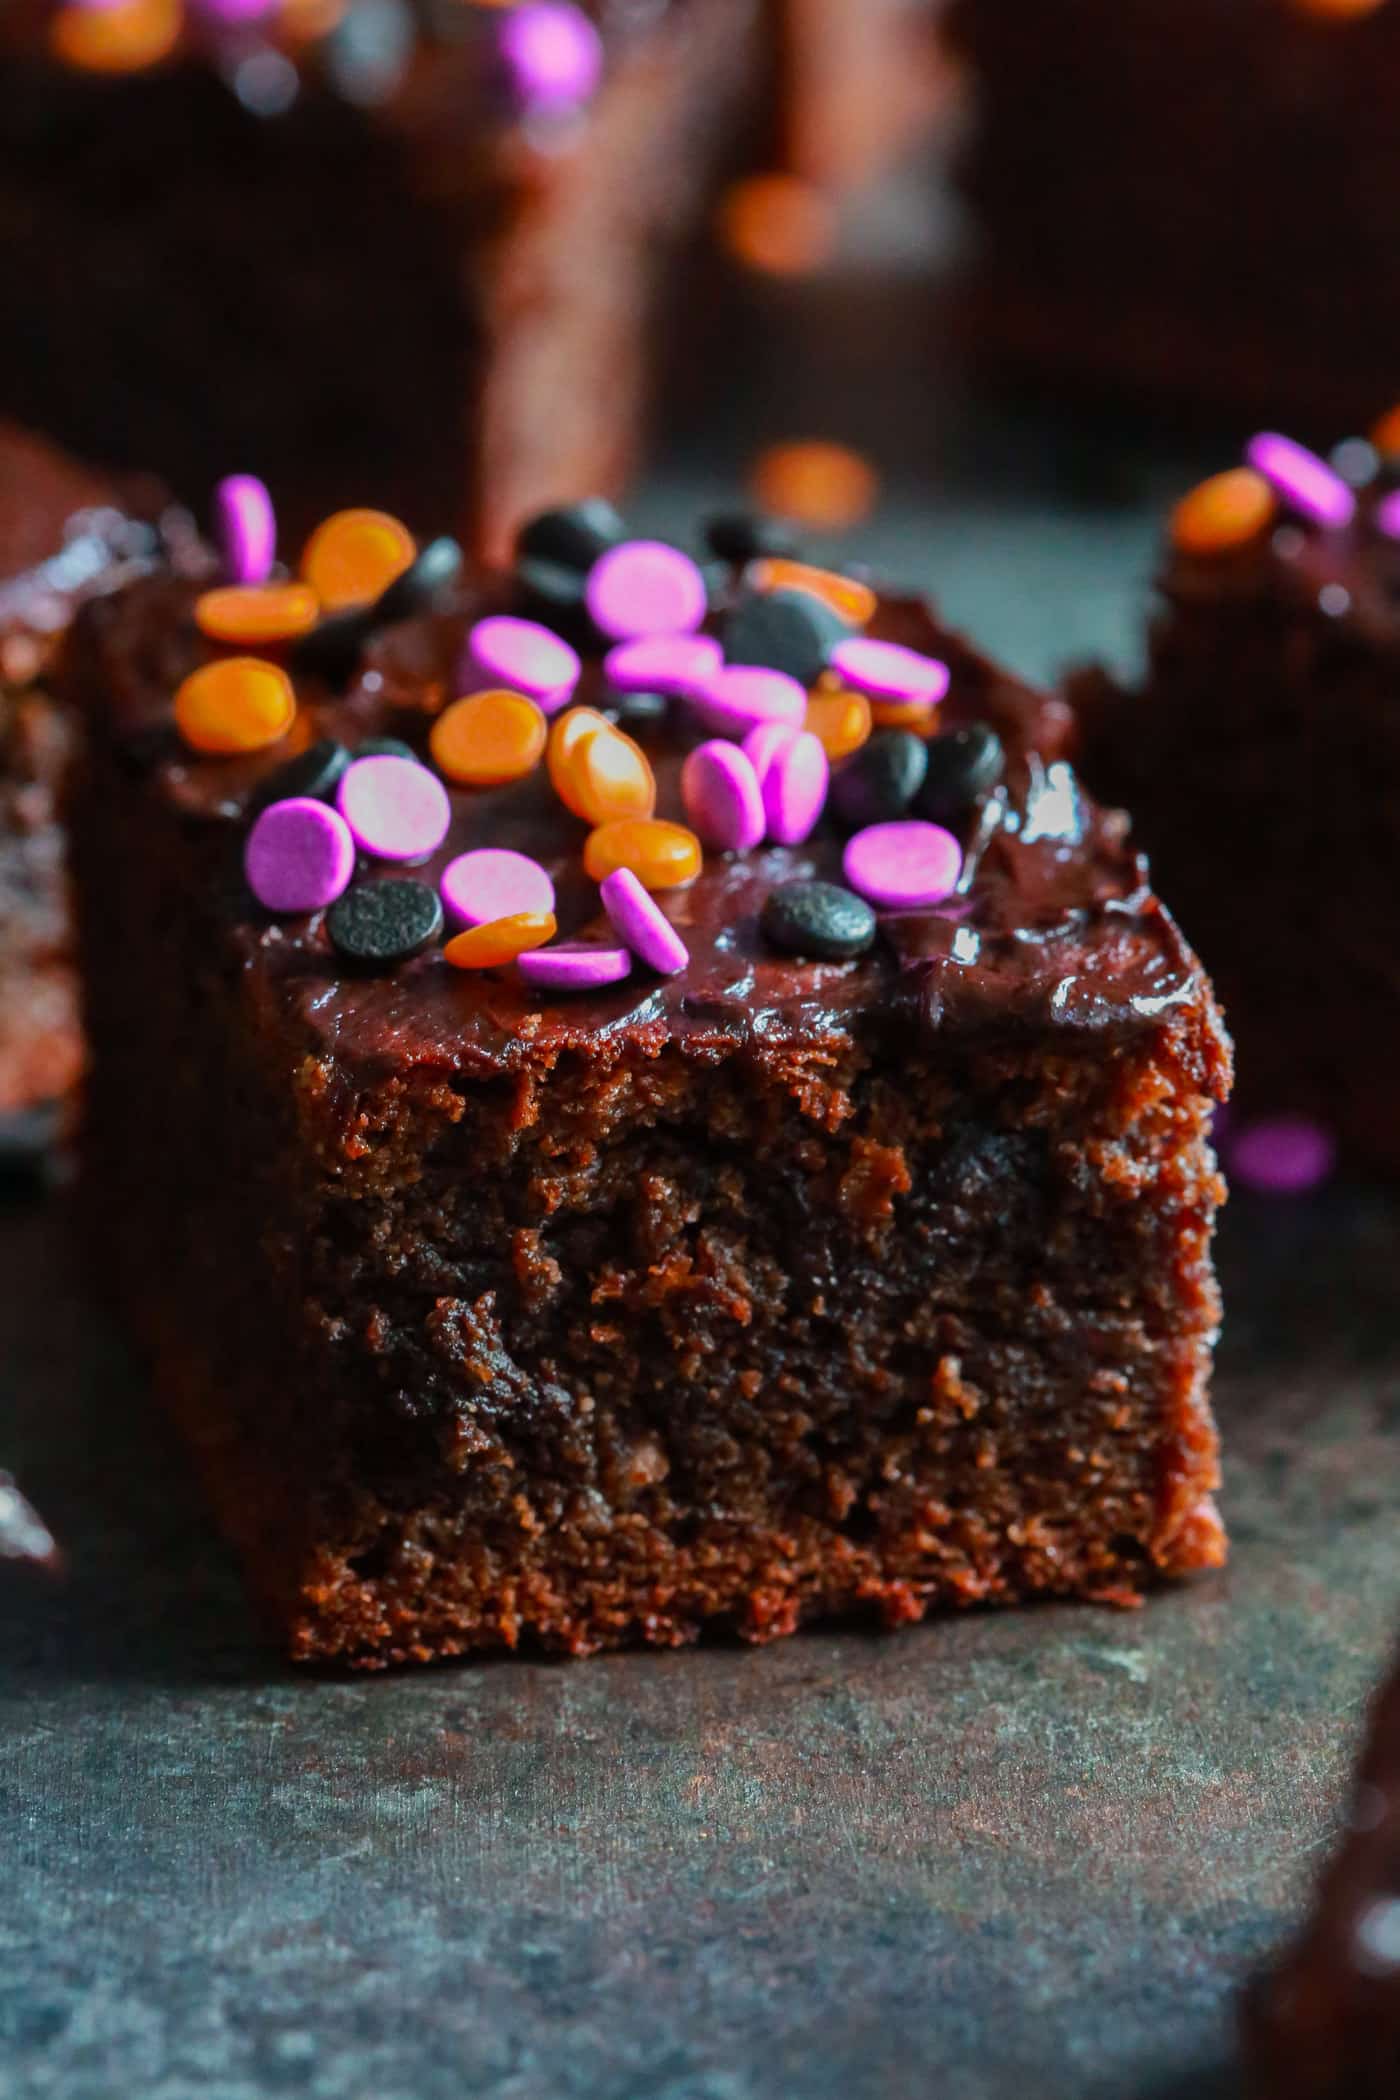  Ready to have a delicious Halloween treat without feeling guilty? I bet you are, so make these Gluten-free Halloween Brownies with your kids using only almond butter, instead of regular flour! 